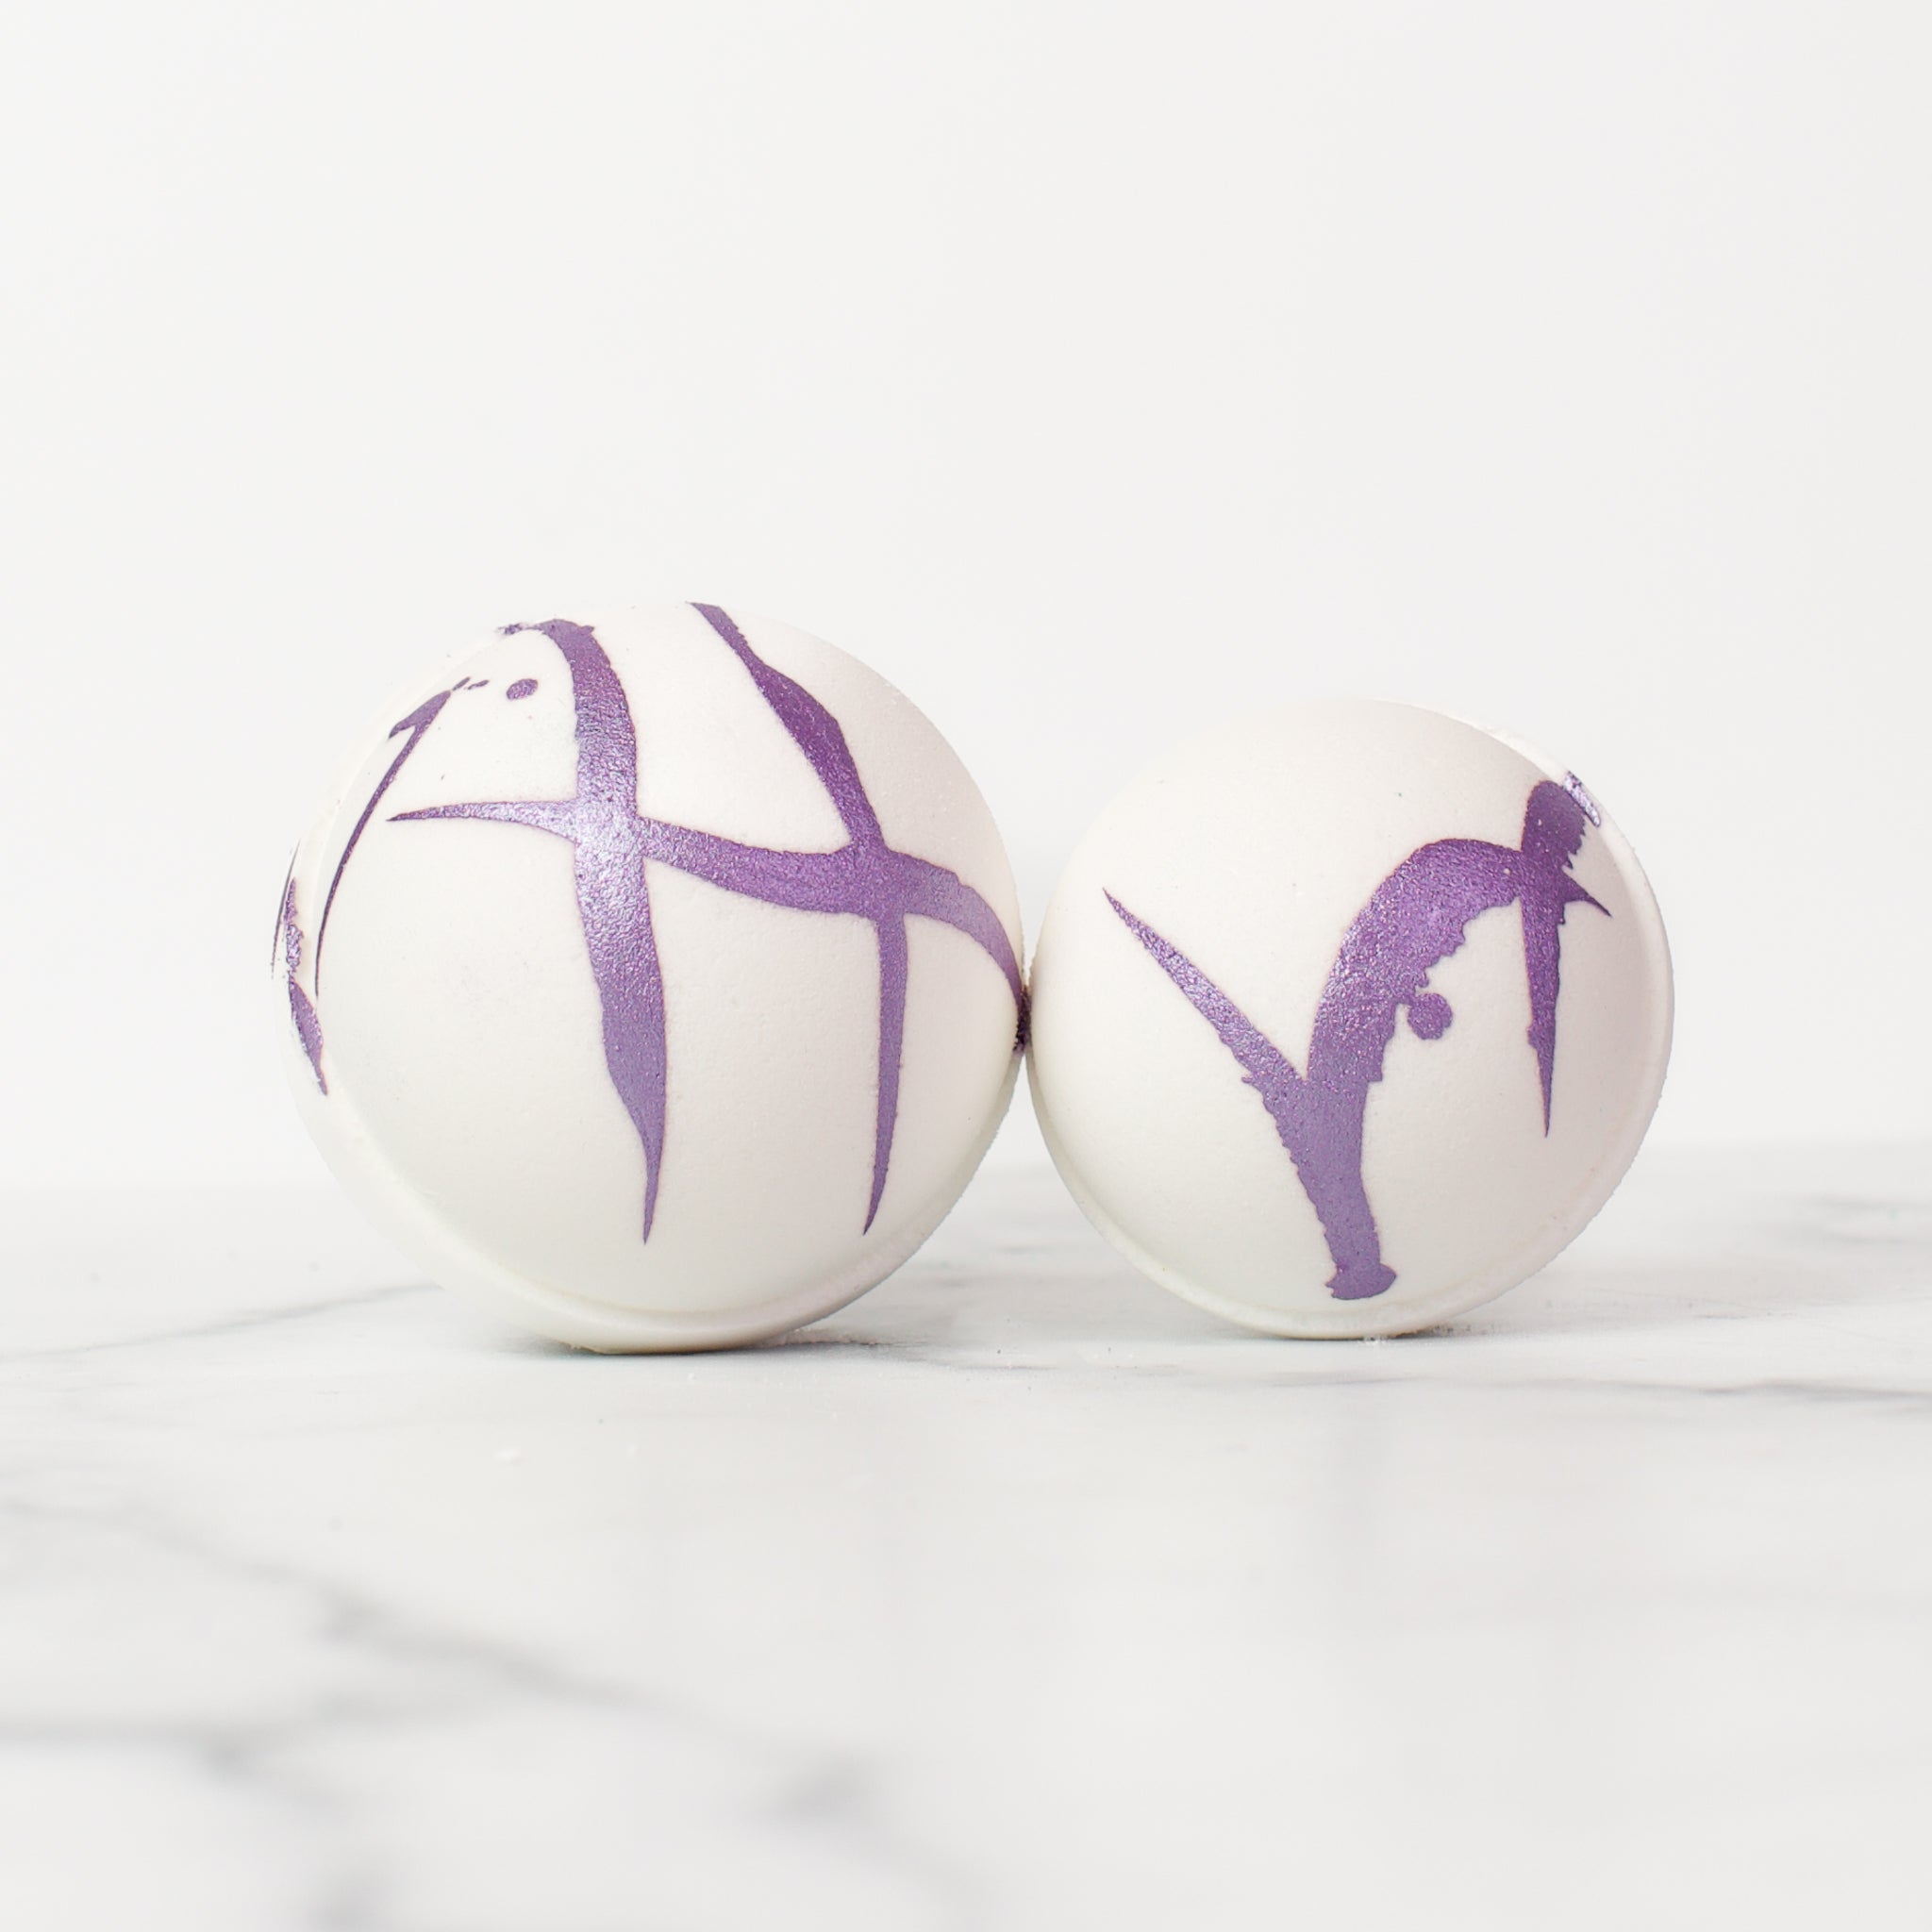 One large and one medium round Lavender bath bombs on a white background. Lavender is a white bath bomb with a light silver-purple splatter design.